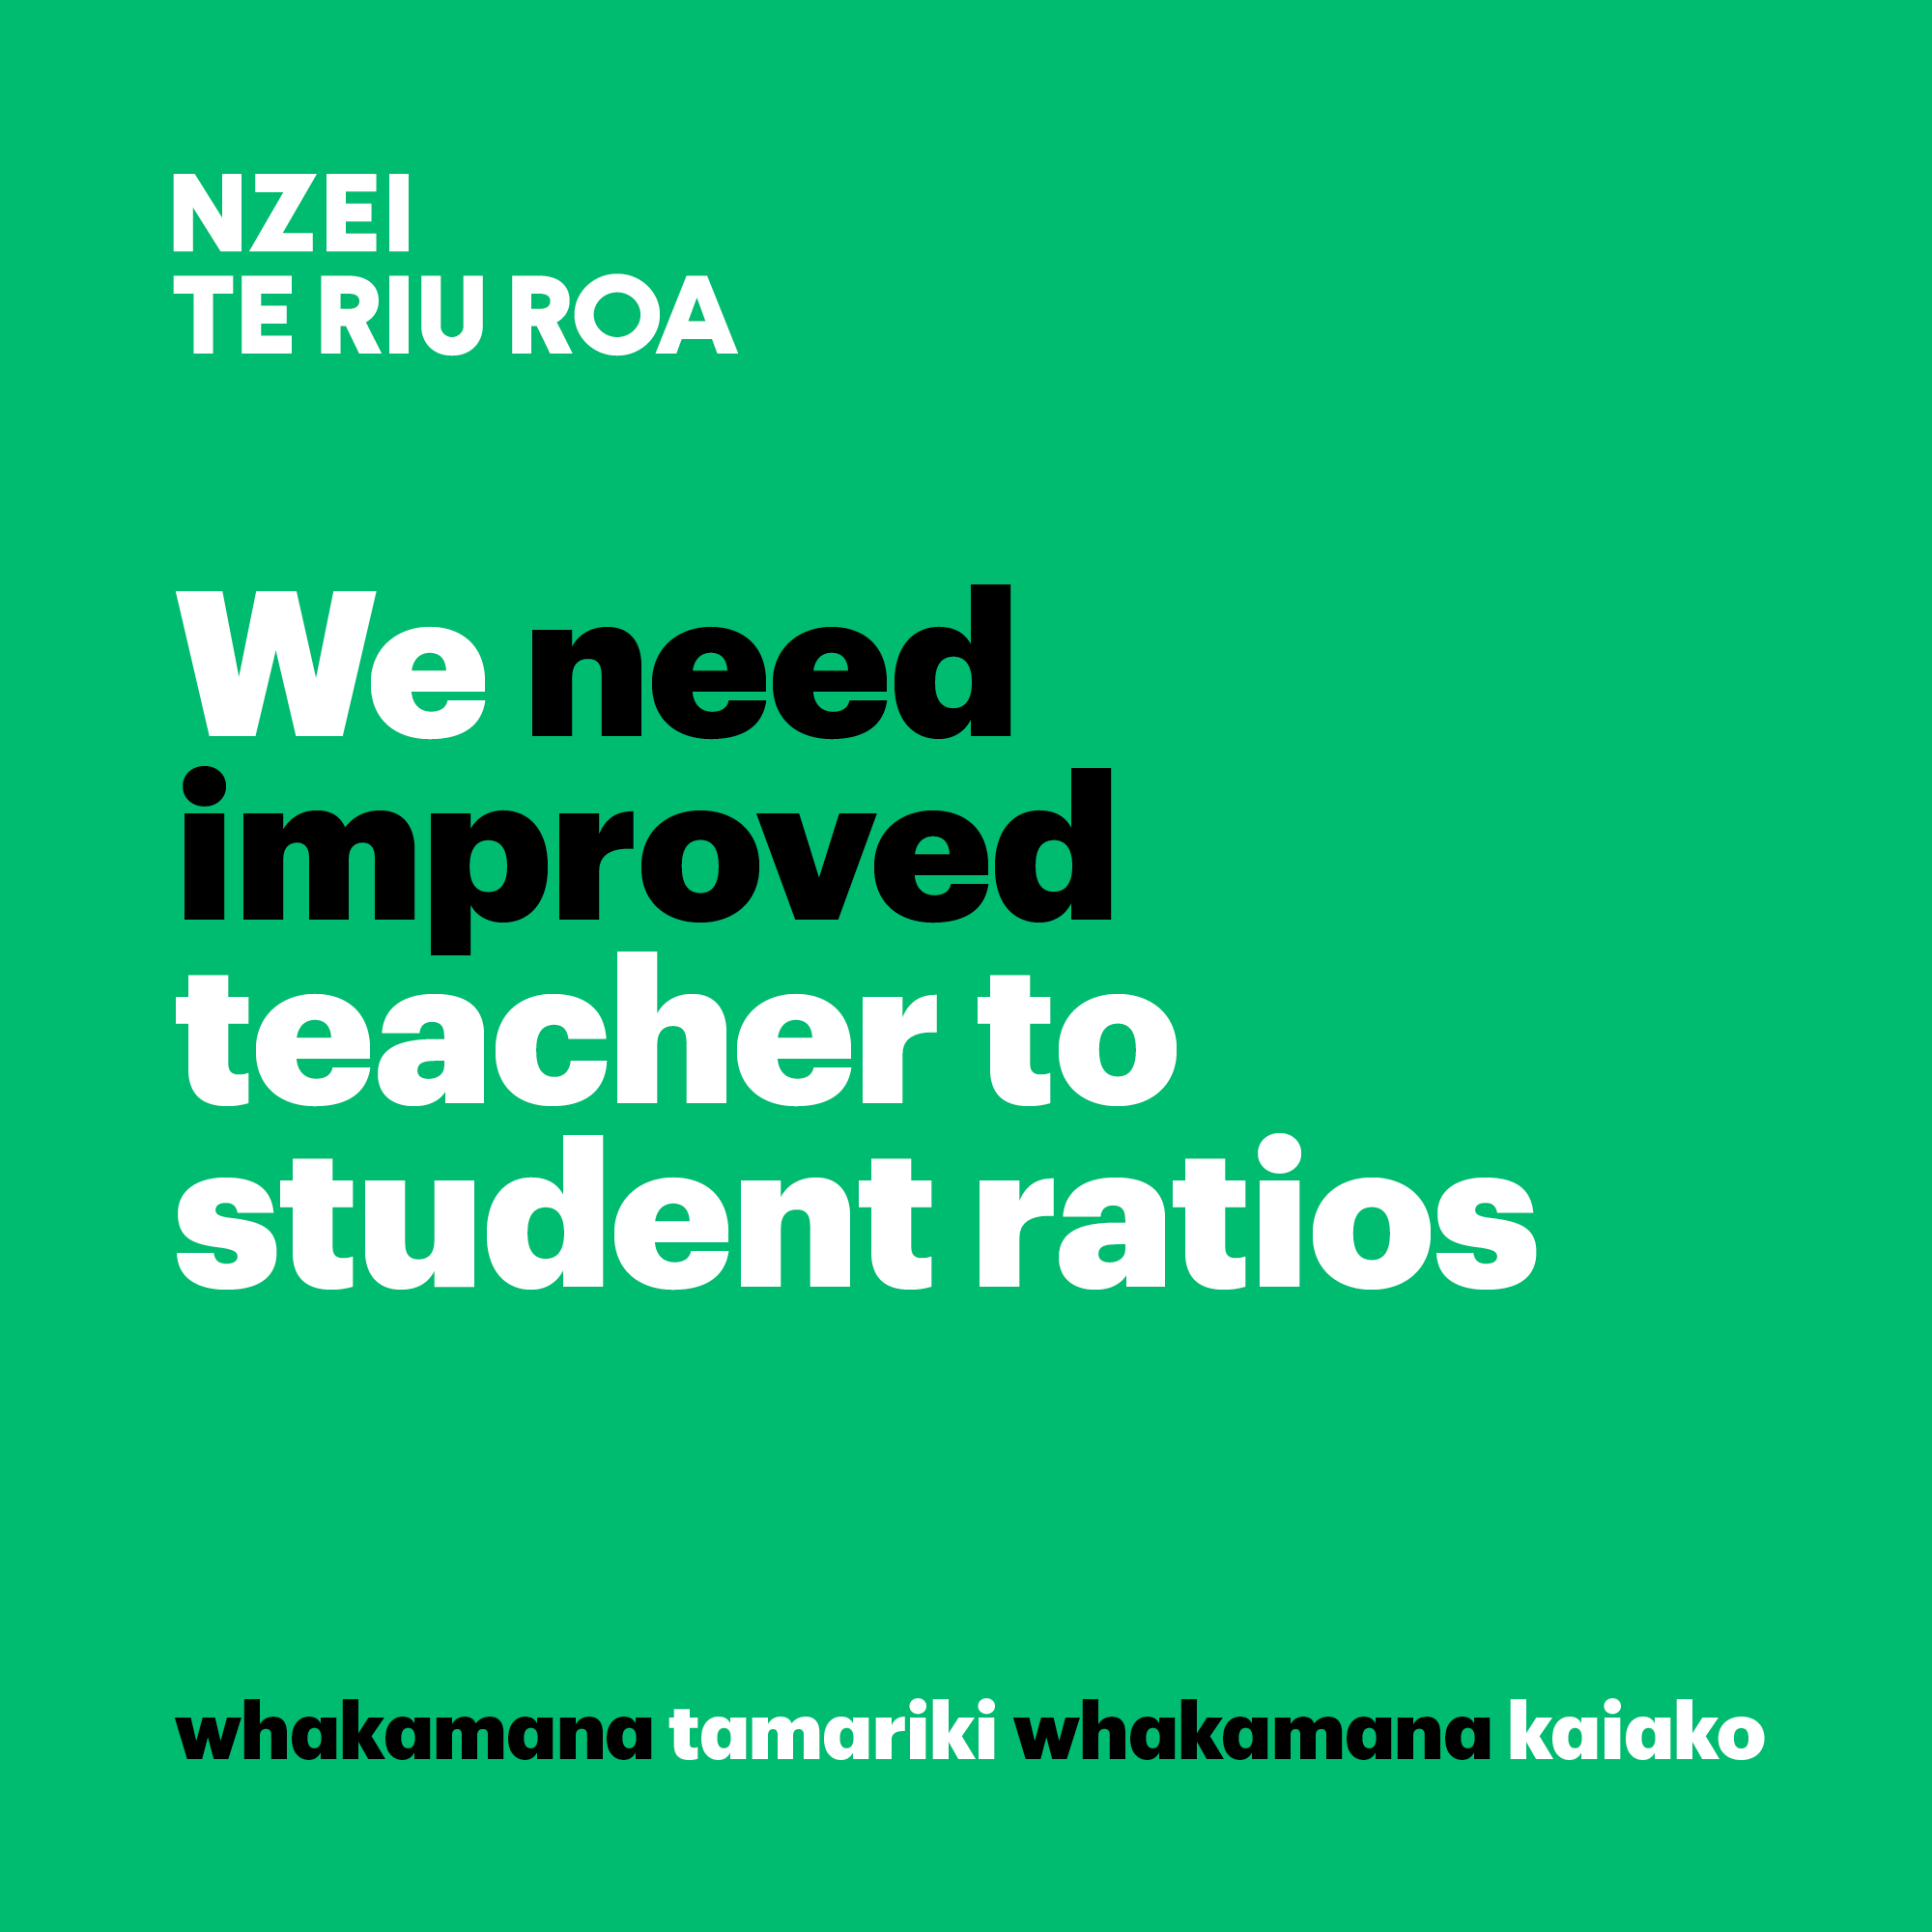 NZPFU SUPPORT FOR TEACHER AND PRINCIPALS’ STRIKE ACTION